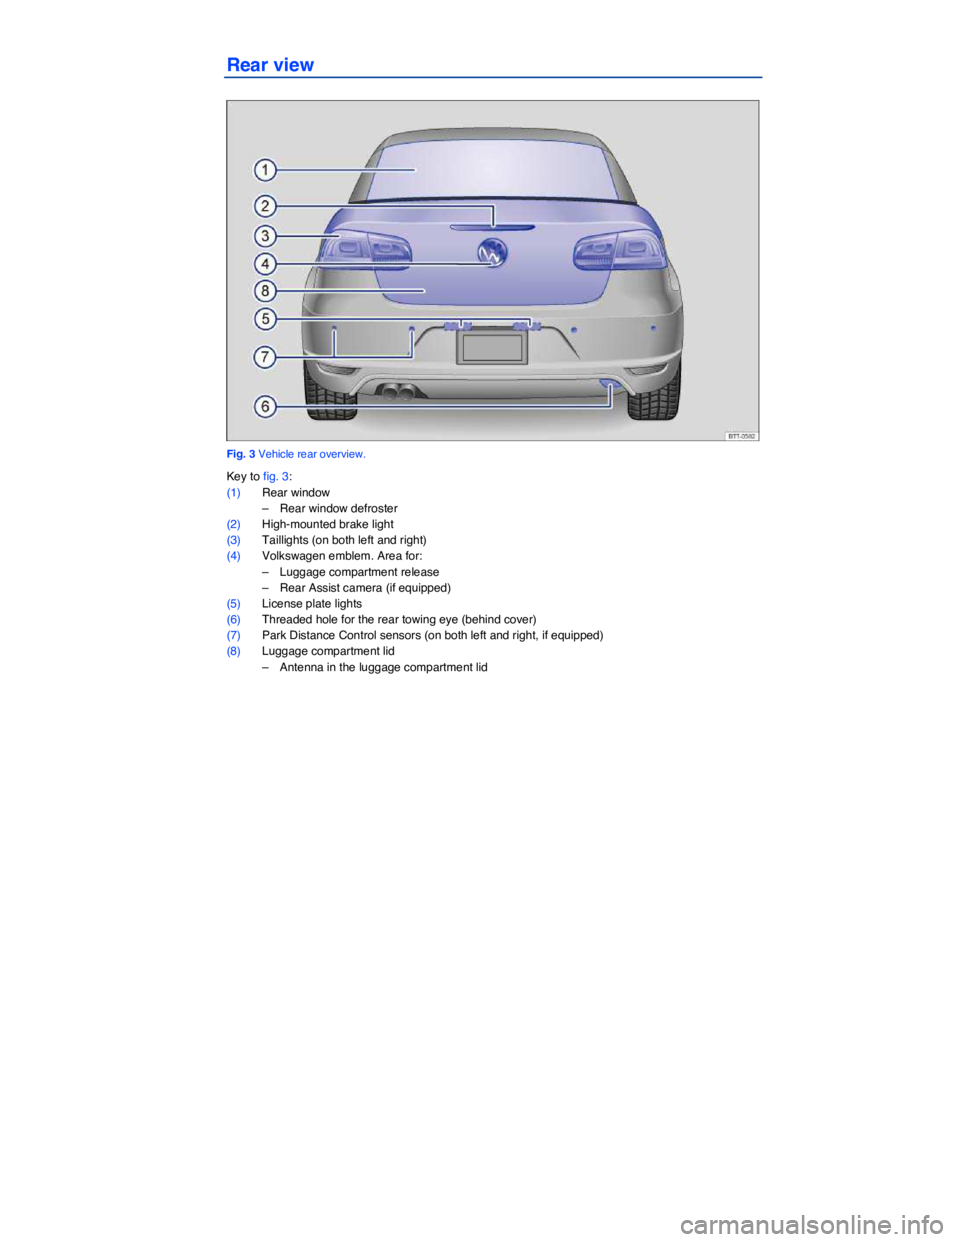 VOLKSWAGEN EOS 2021  Owner´s Manual  
 
Rear view 
 
Fig. 3 Vehicle rear overview. 
Key to fig. 3: 
(1) Rear window 
–  Rear window defroster  
(2) High-mounted brake light 
(3) Taillights (on both left and right)  
(4) Volkswagen emb